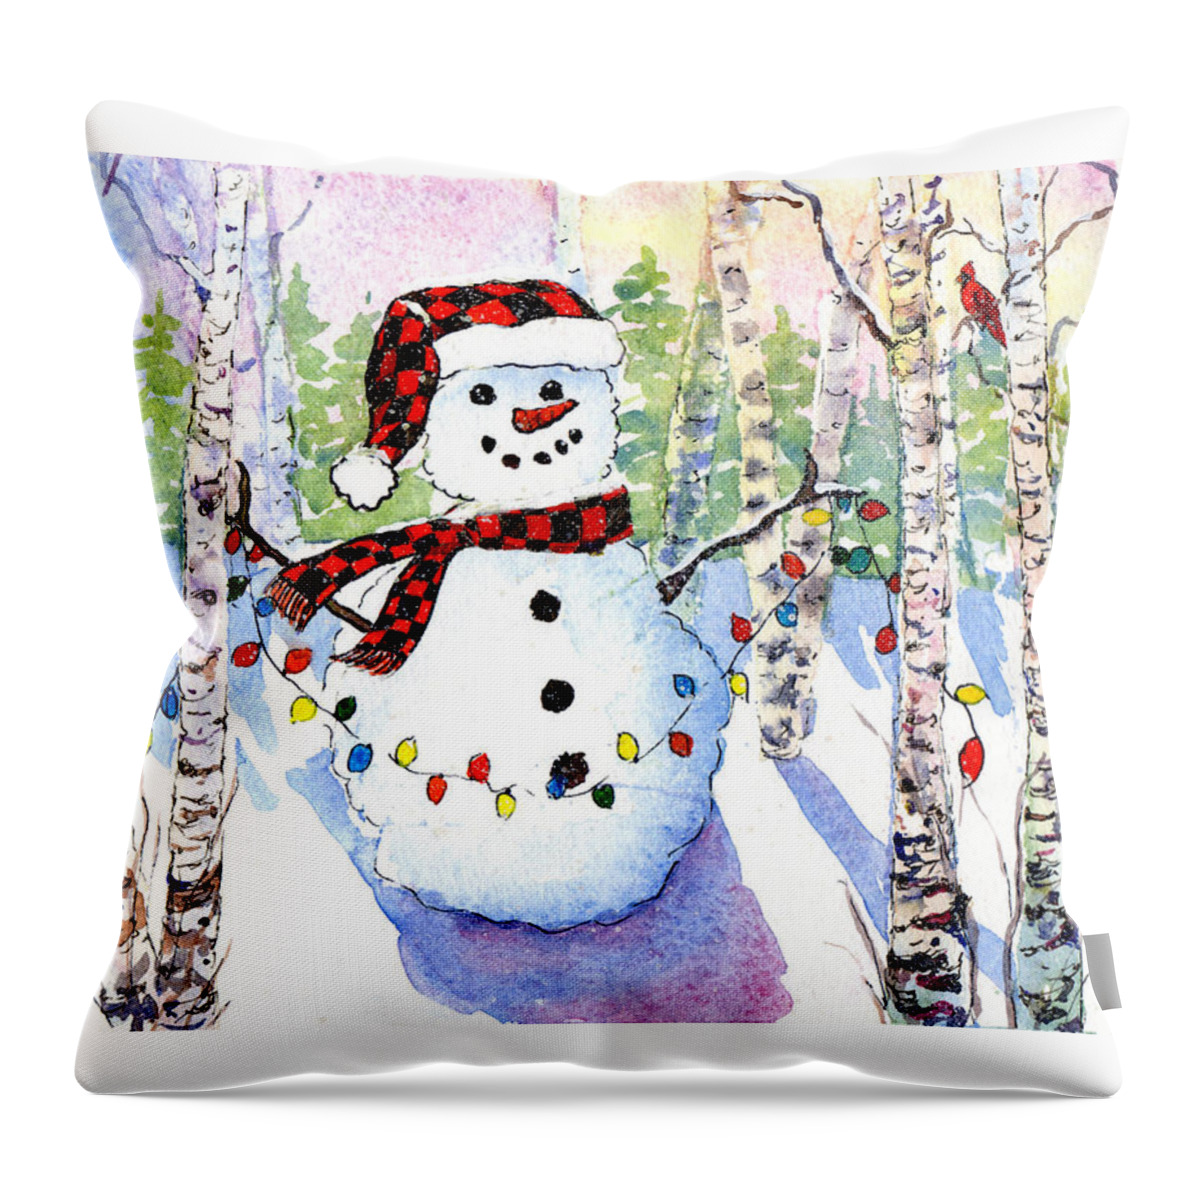 Snowman Throw Pillow featuring the painting Snowy Wishes by Mary Giacomini